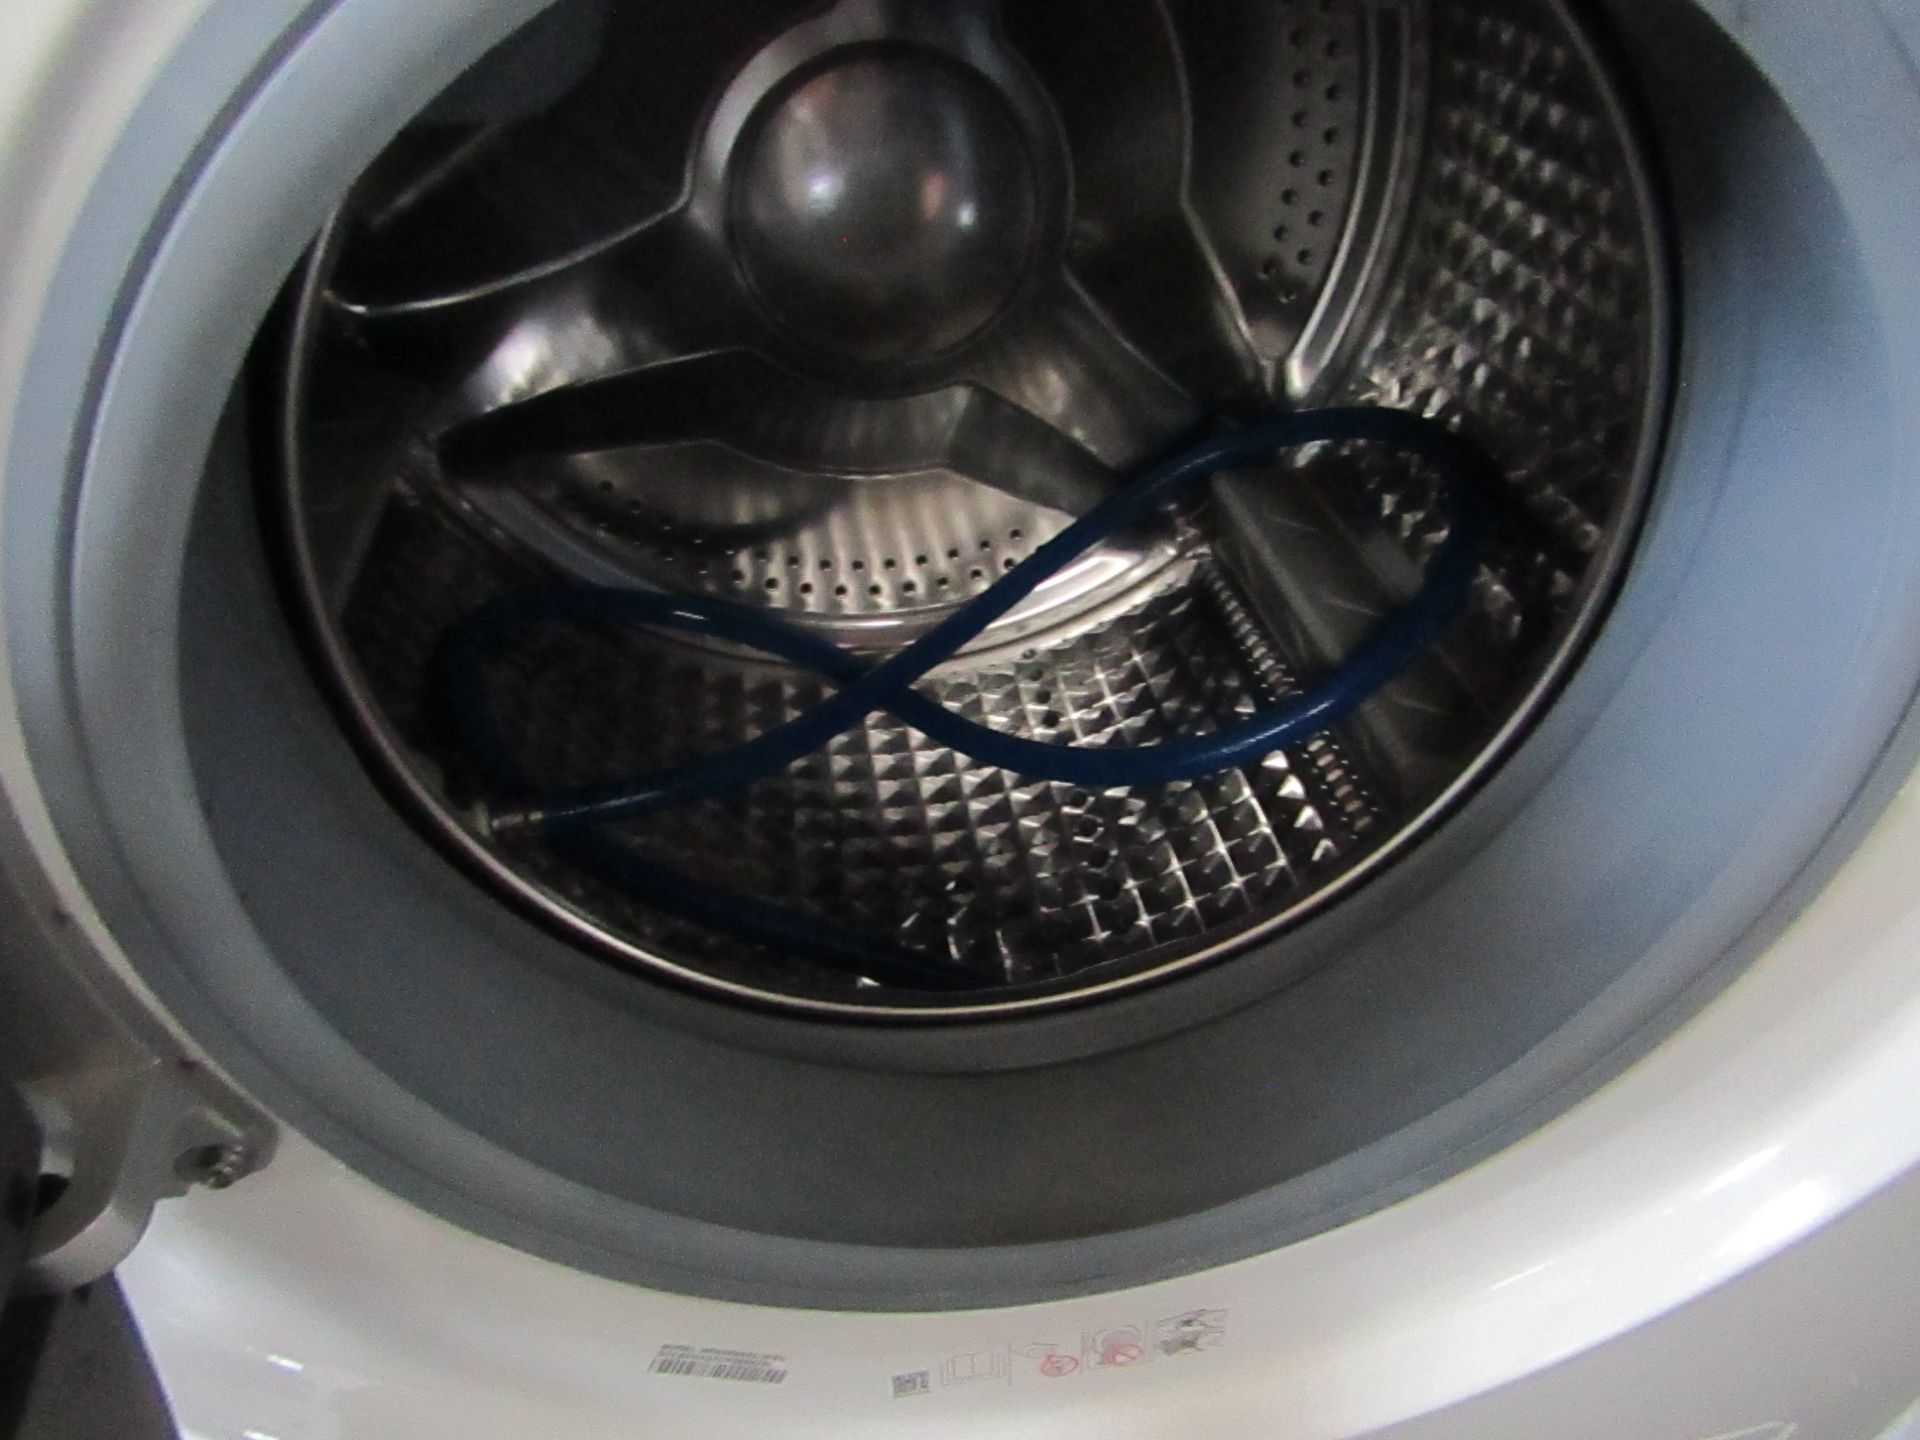 Samsung eco Bubble Washer Dryer, Powers on and makes a noise but the display is not working to be - Image 2 of 2